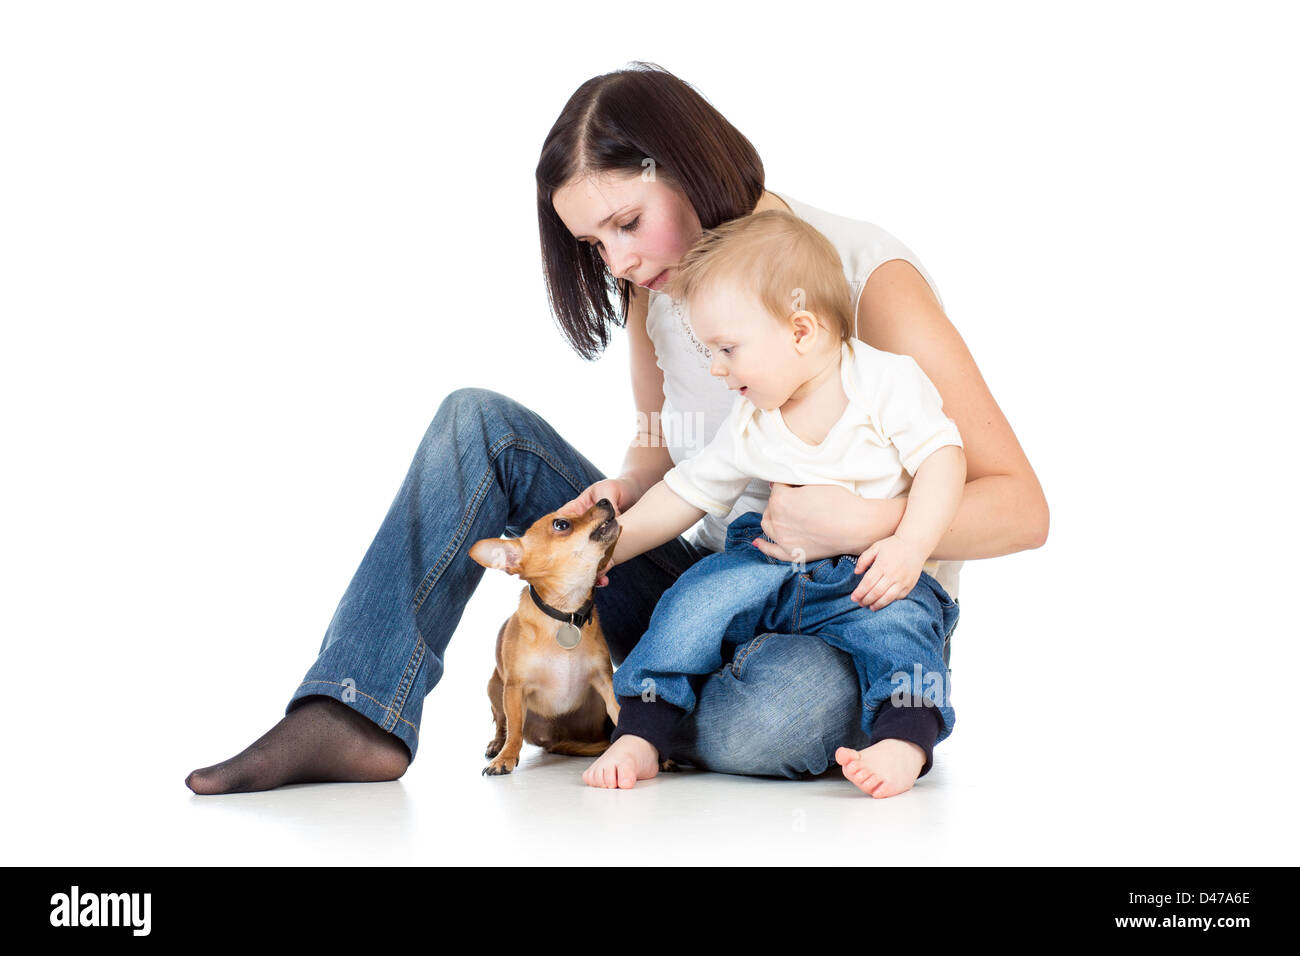 mother, baby boy and dog isolated on white background Stock Photo